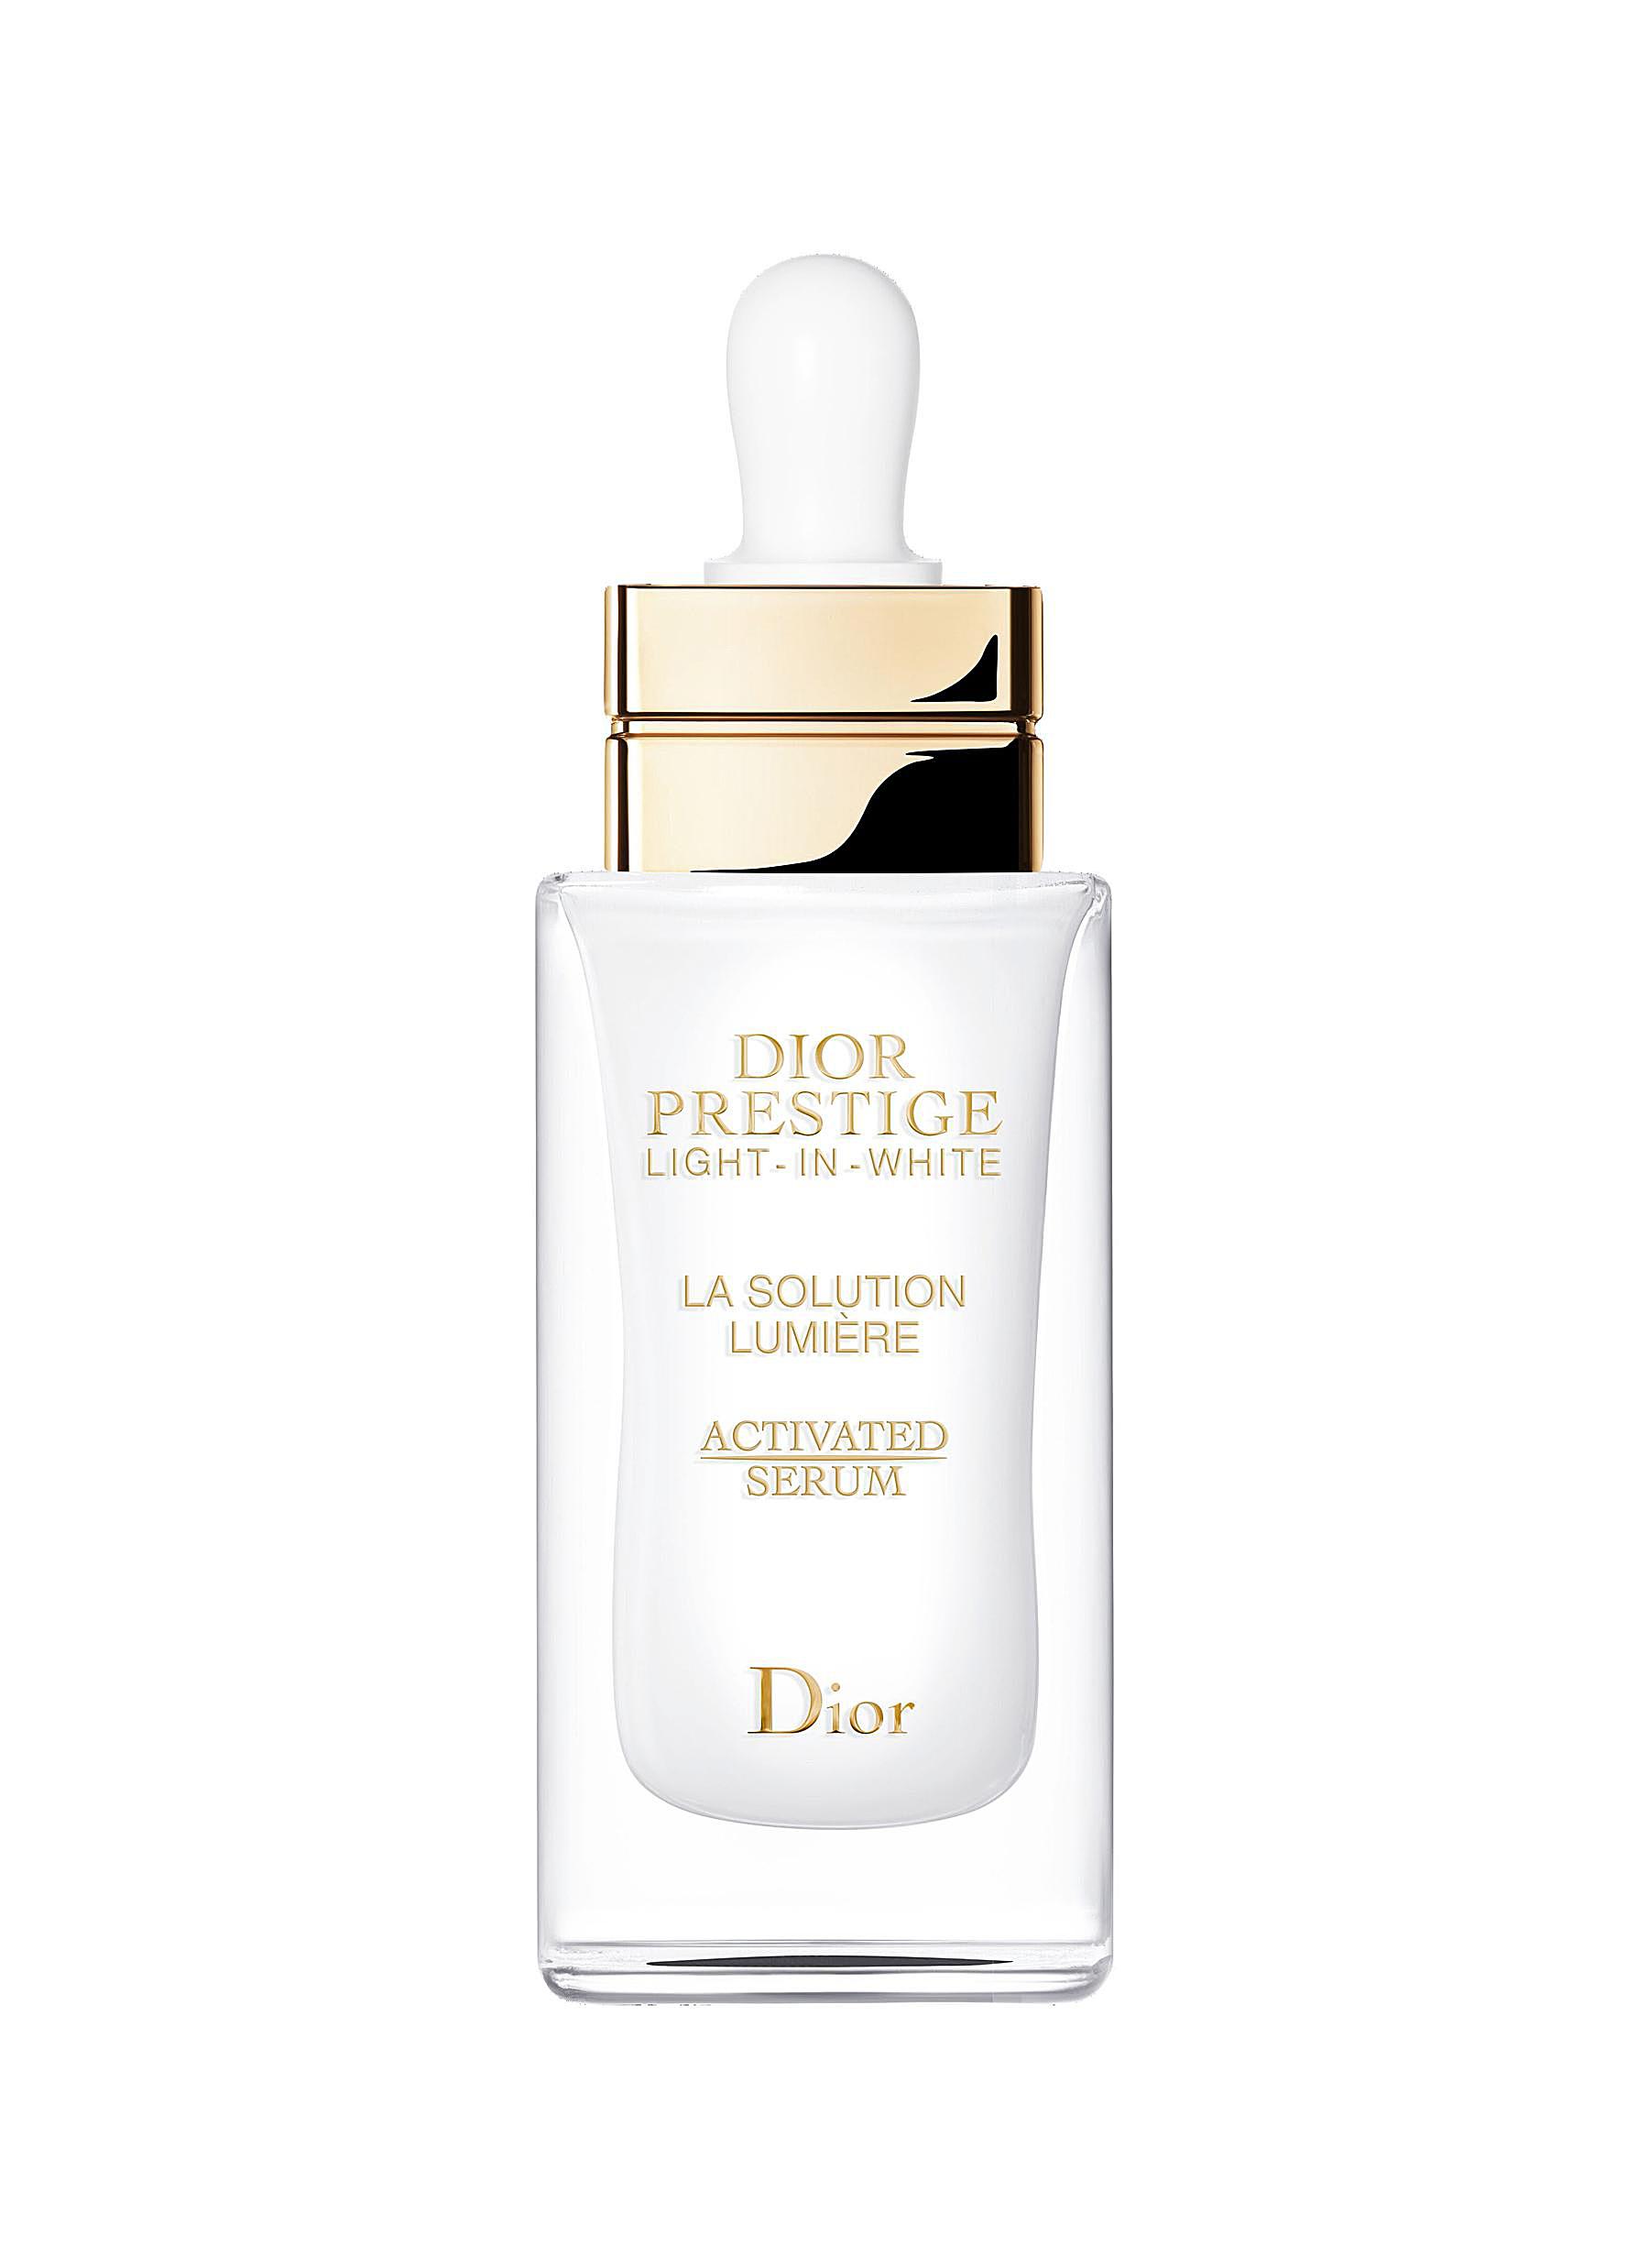 DIOR BEAUTY | Prestige Light-in-White La Solution Lumière Activated Serum  30ml | Beauty | Lane Crawford